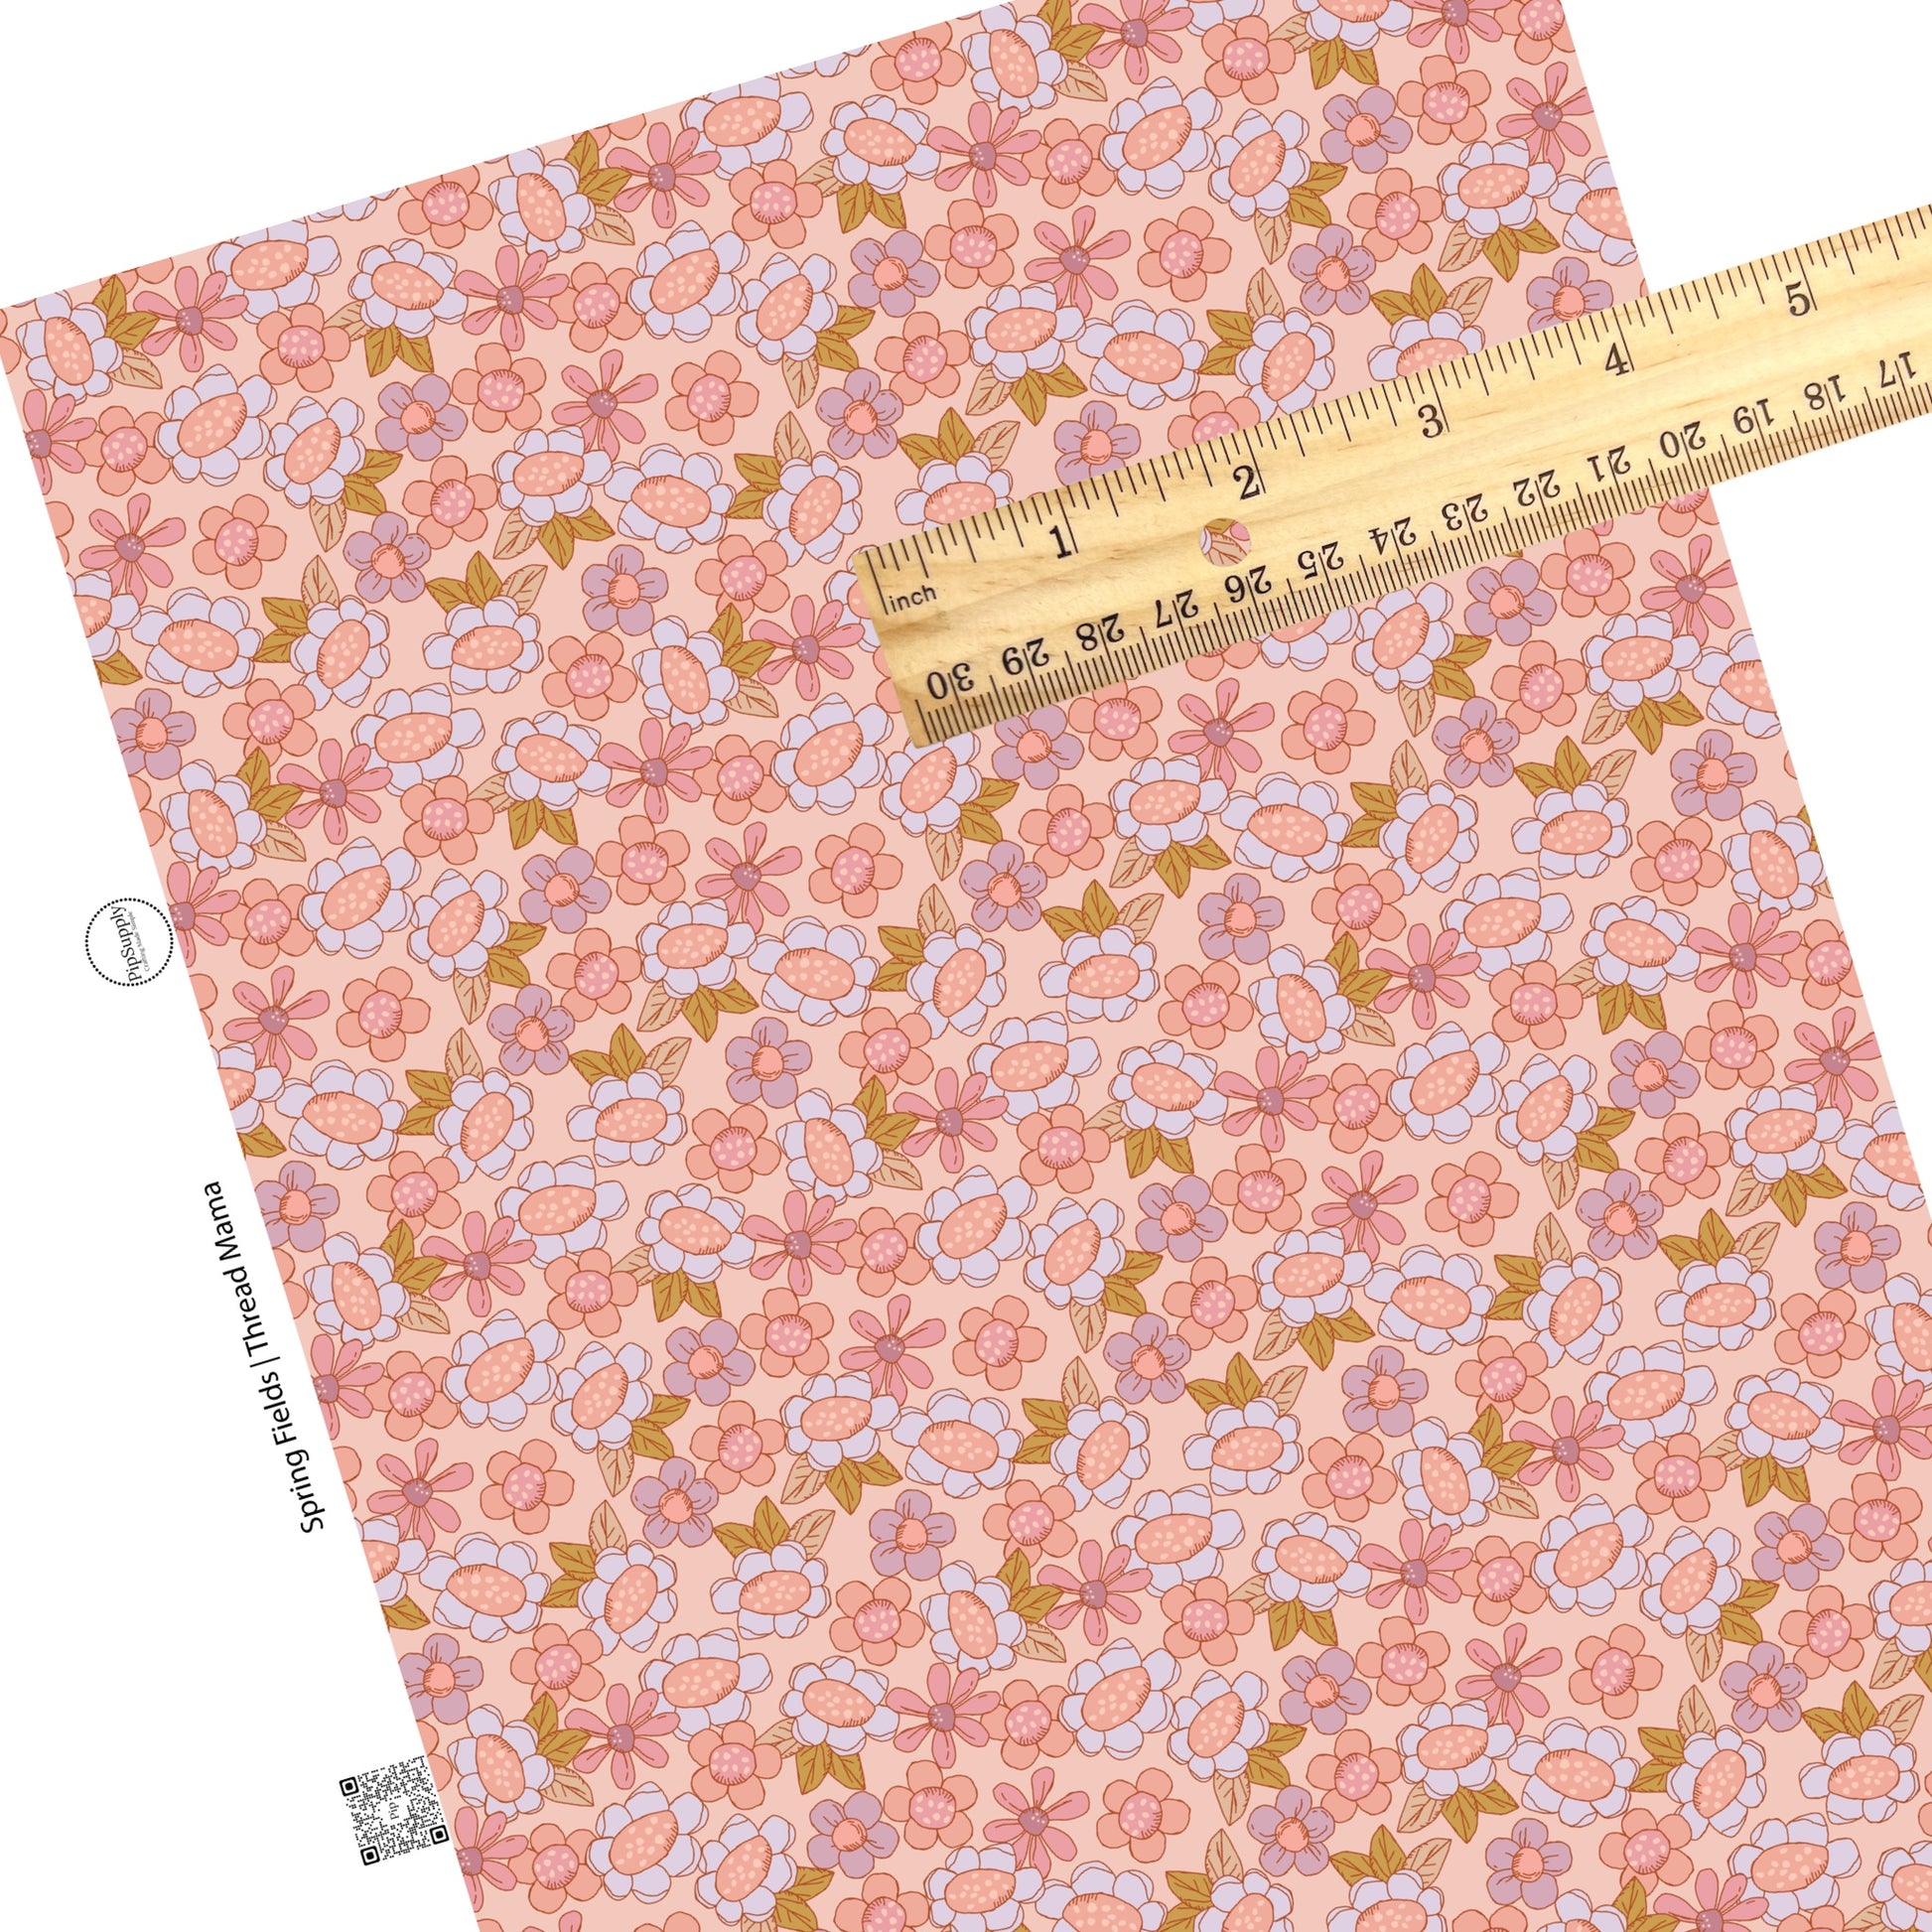 Field of pink and purple flowers with pink centers and green leaves on a pink faux leather sheet